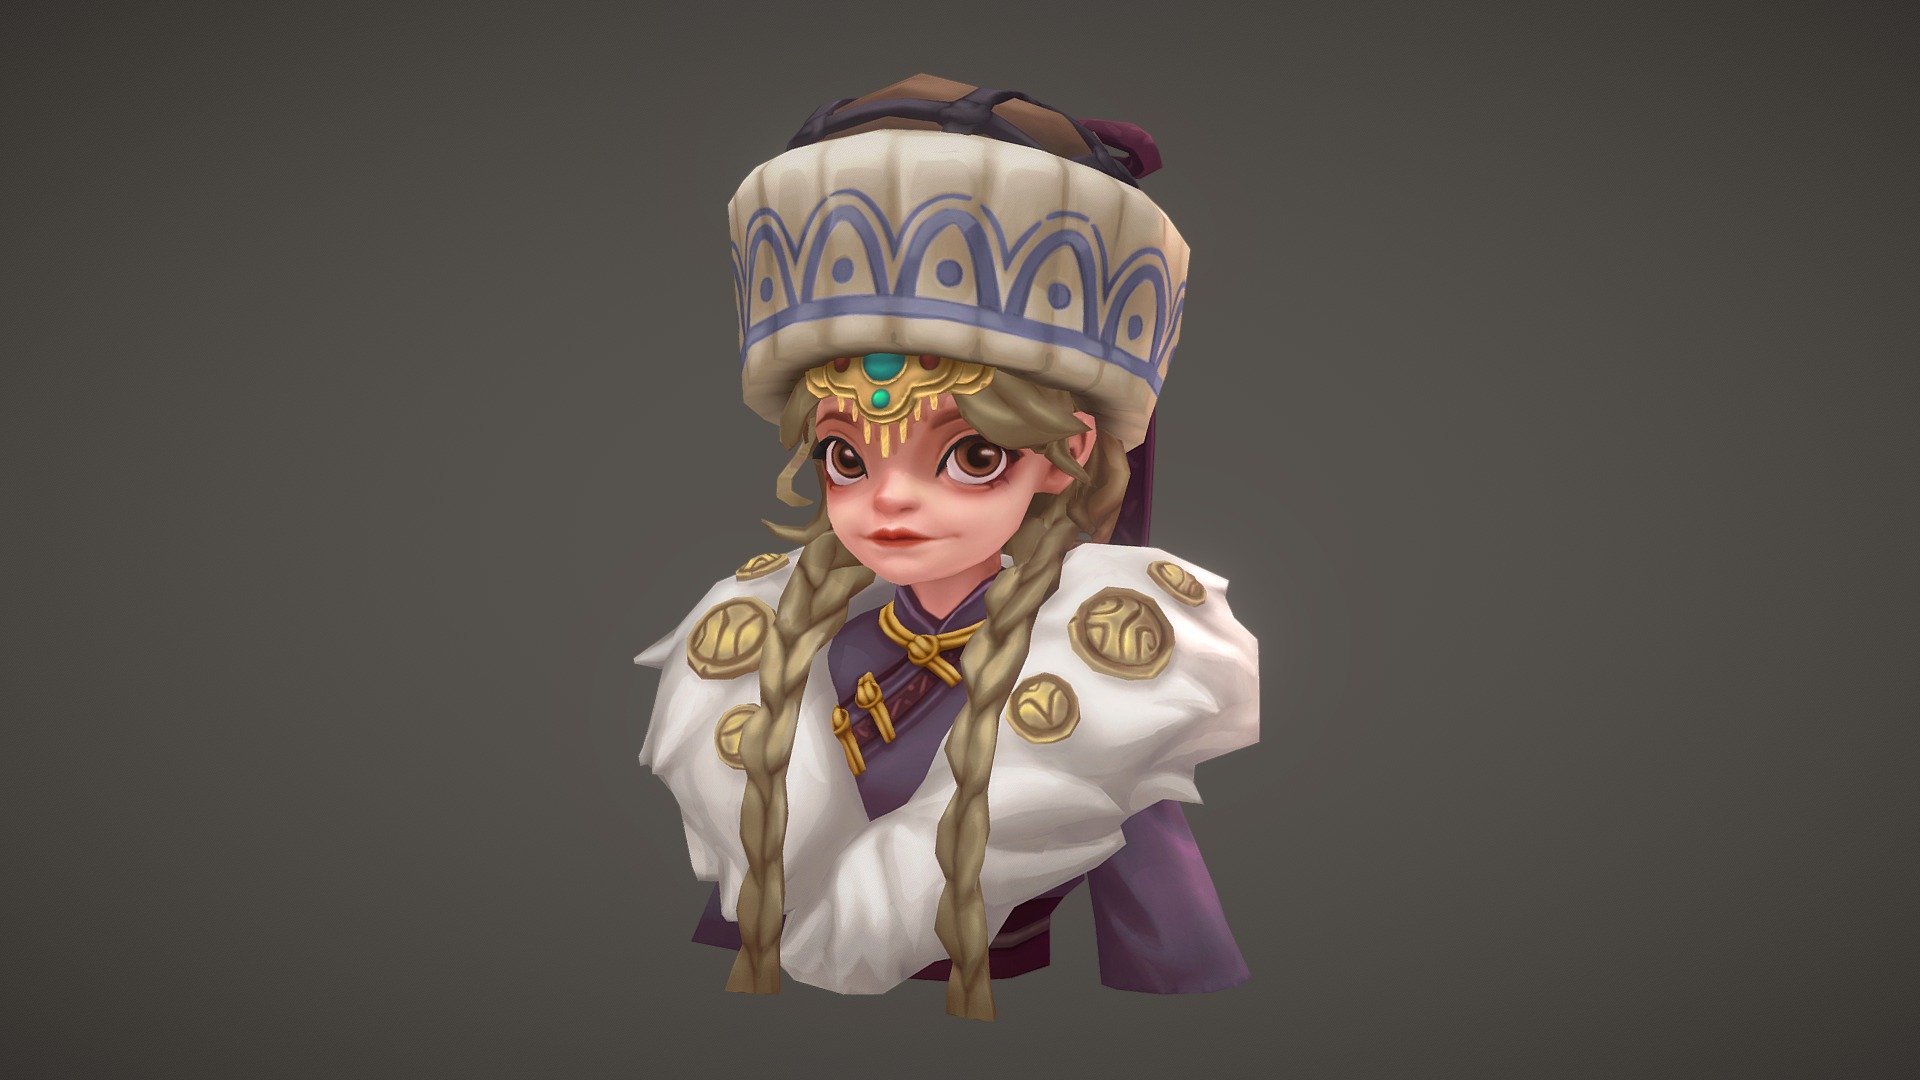 Made this piece based on concept art called 部落 Mönkhtsetseg by Crispy Mushrooms! This was done over the course of 9 weeks during the CGMA course: Stylized Character Arts for Games with instructor Weston Reid! The character blockout and sculpt were done in ZBrush, retopology in Blender and CozyBlanket, baking in Marmoset Toolbag 4, texturing in Substance Painter and 3DCoat, and finally rigged and animated back in Blender! The class was challenging, but I had a lot of fun and learned a lot! I'm super excited to apply what I've learned in future pieces! For more detaills, check out the ArtStation post here:https://www.artstation.com/artwork/m86kbY! :) - 部落 Mönkhtsetseg - 3D model by erin! (@arokma) 3d model